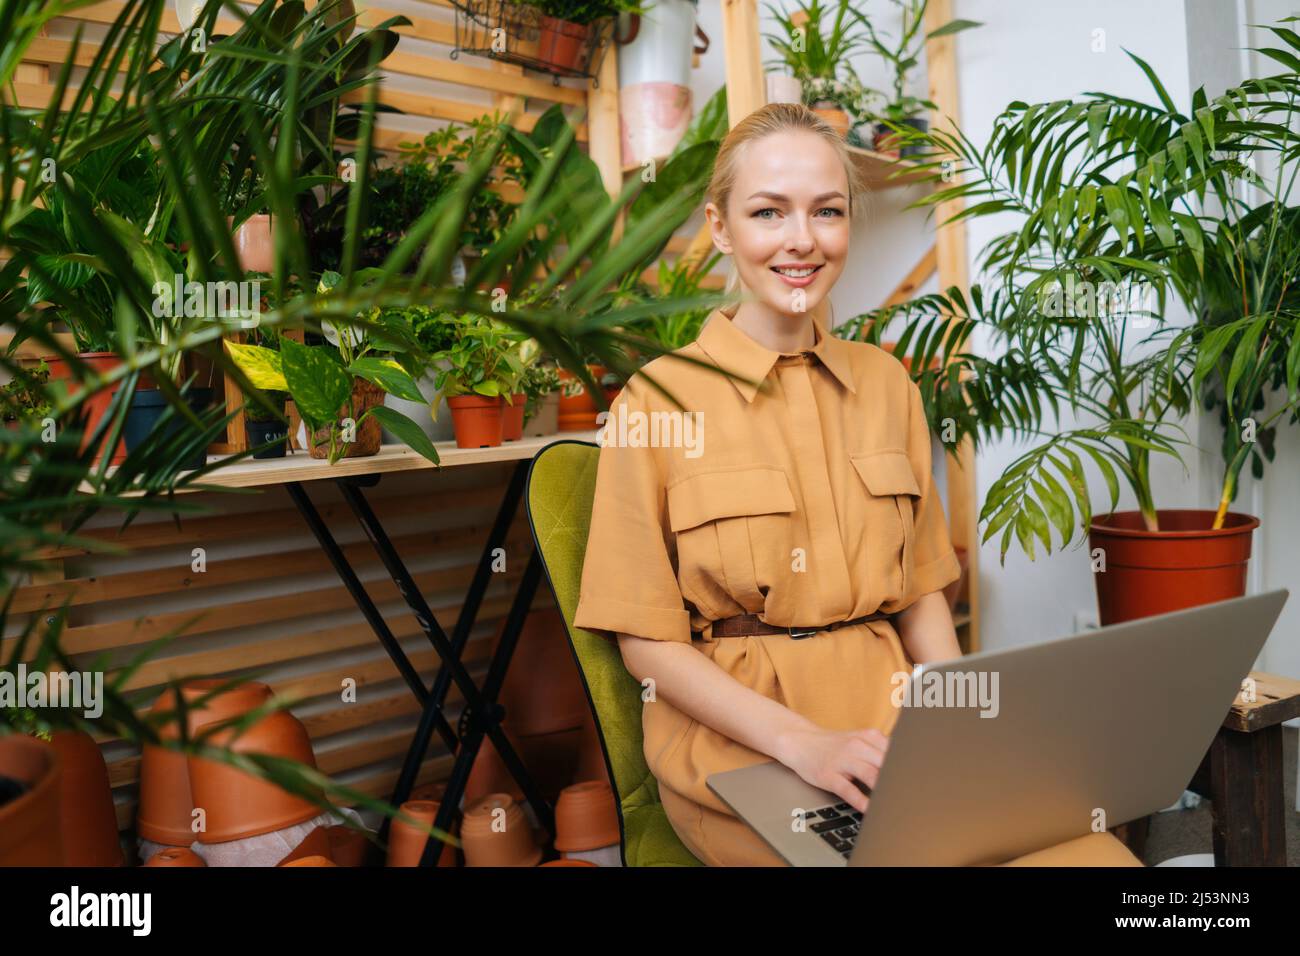 Portrait of attractive young businesswoman floral store owner sitting with laptop among green plants, looking at camera. Stock Photo